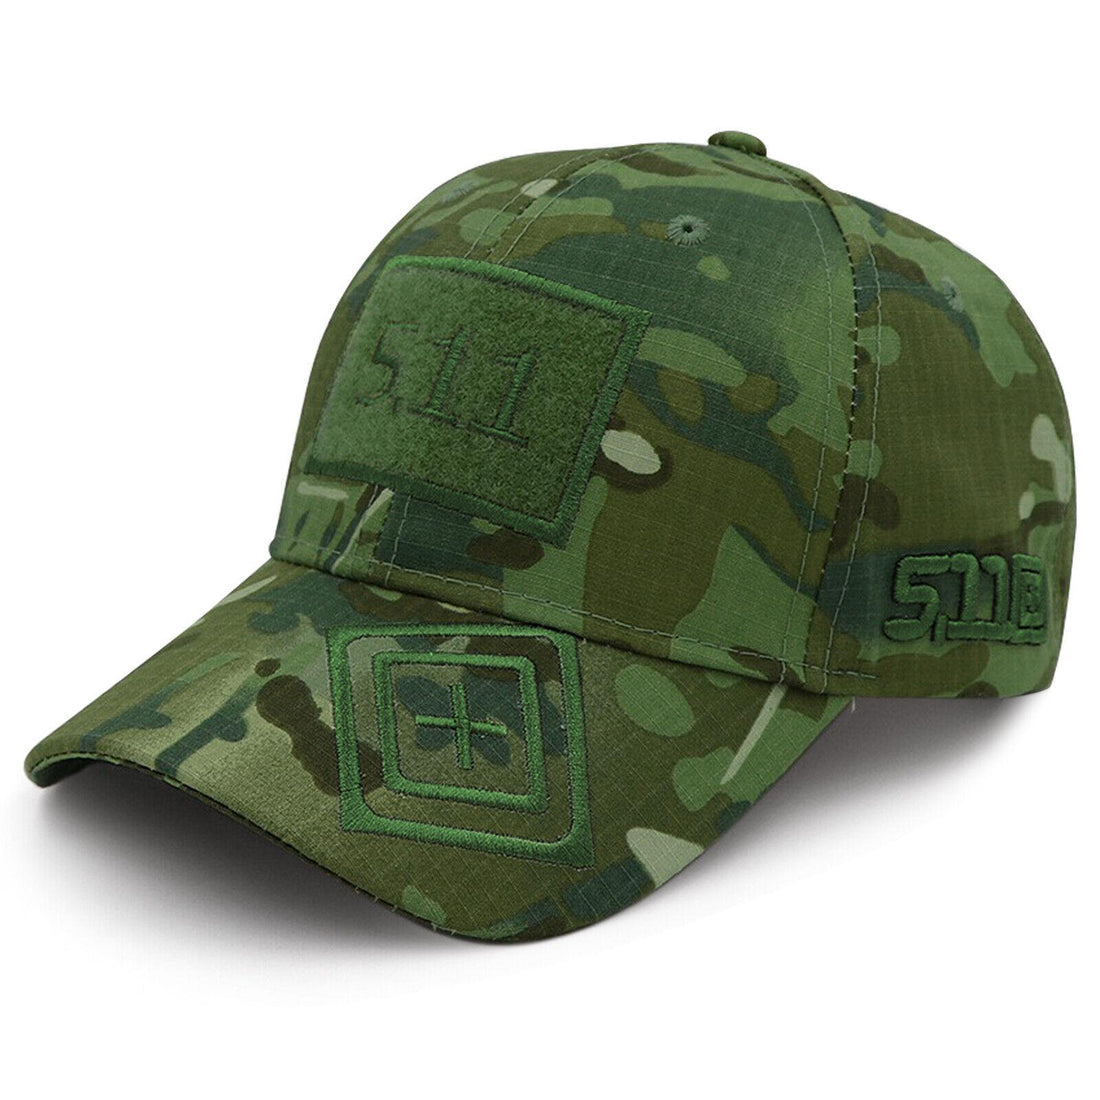 Mens Camouflage Baseball Cap Womens Army Camo Military Cadet Combat Hunting Hat